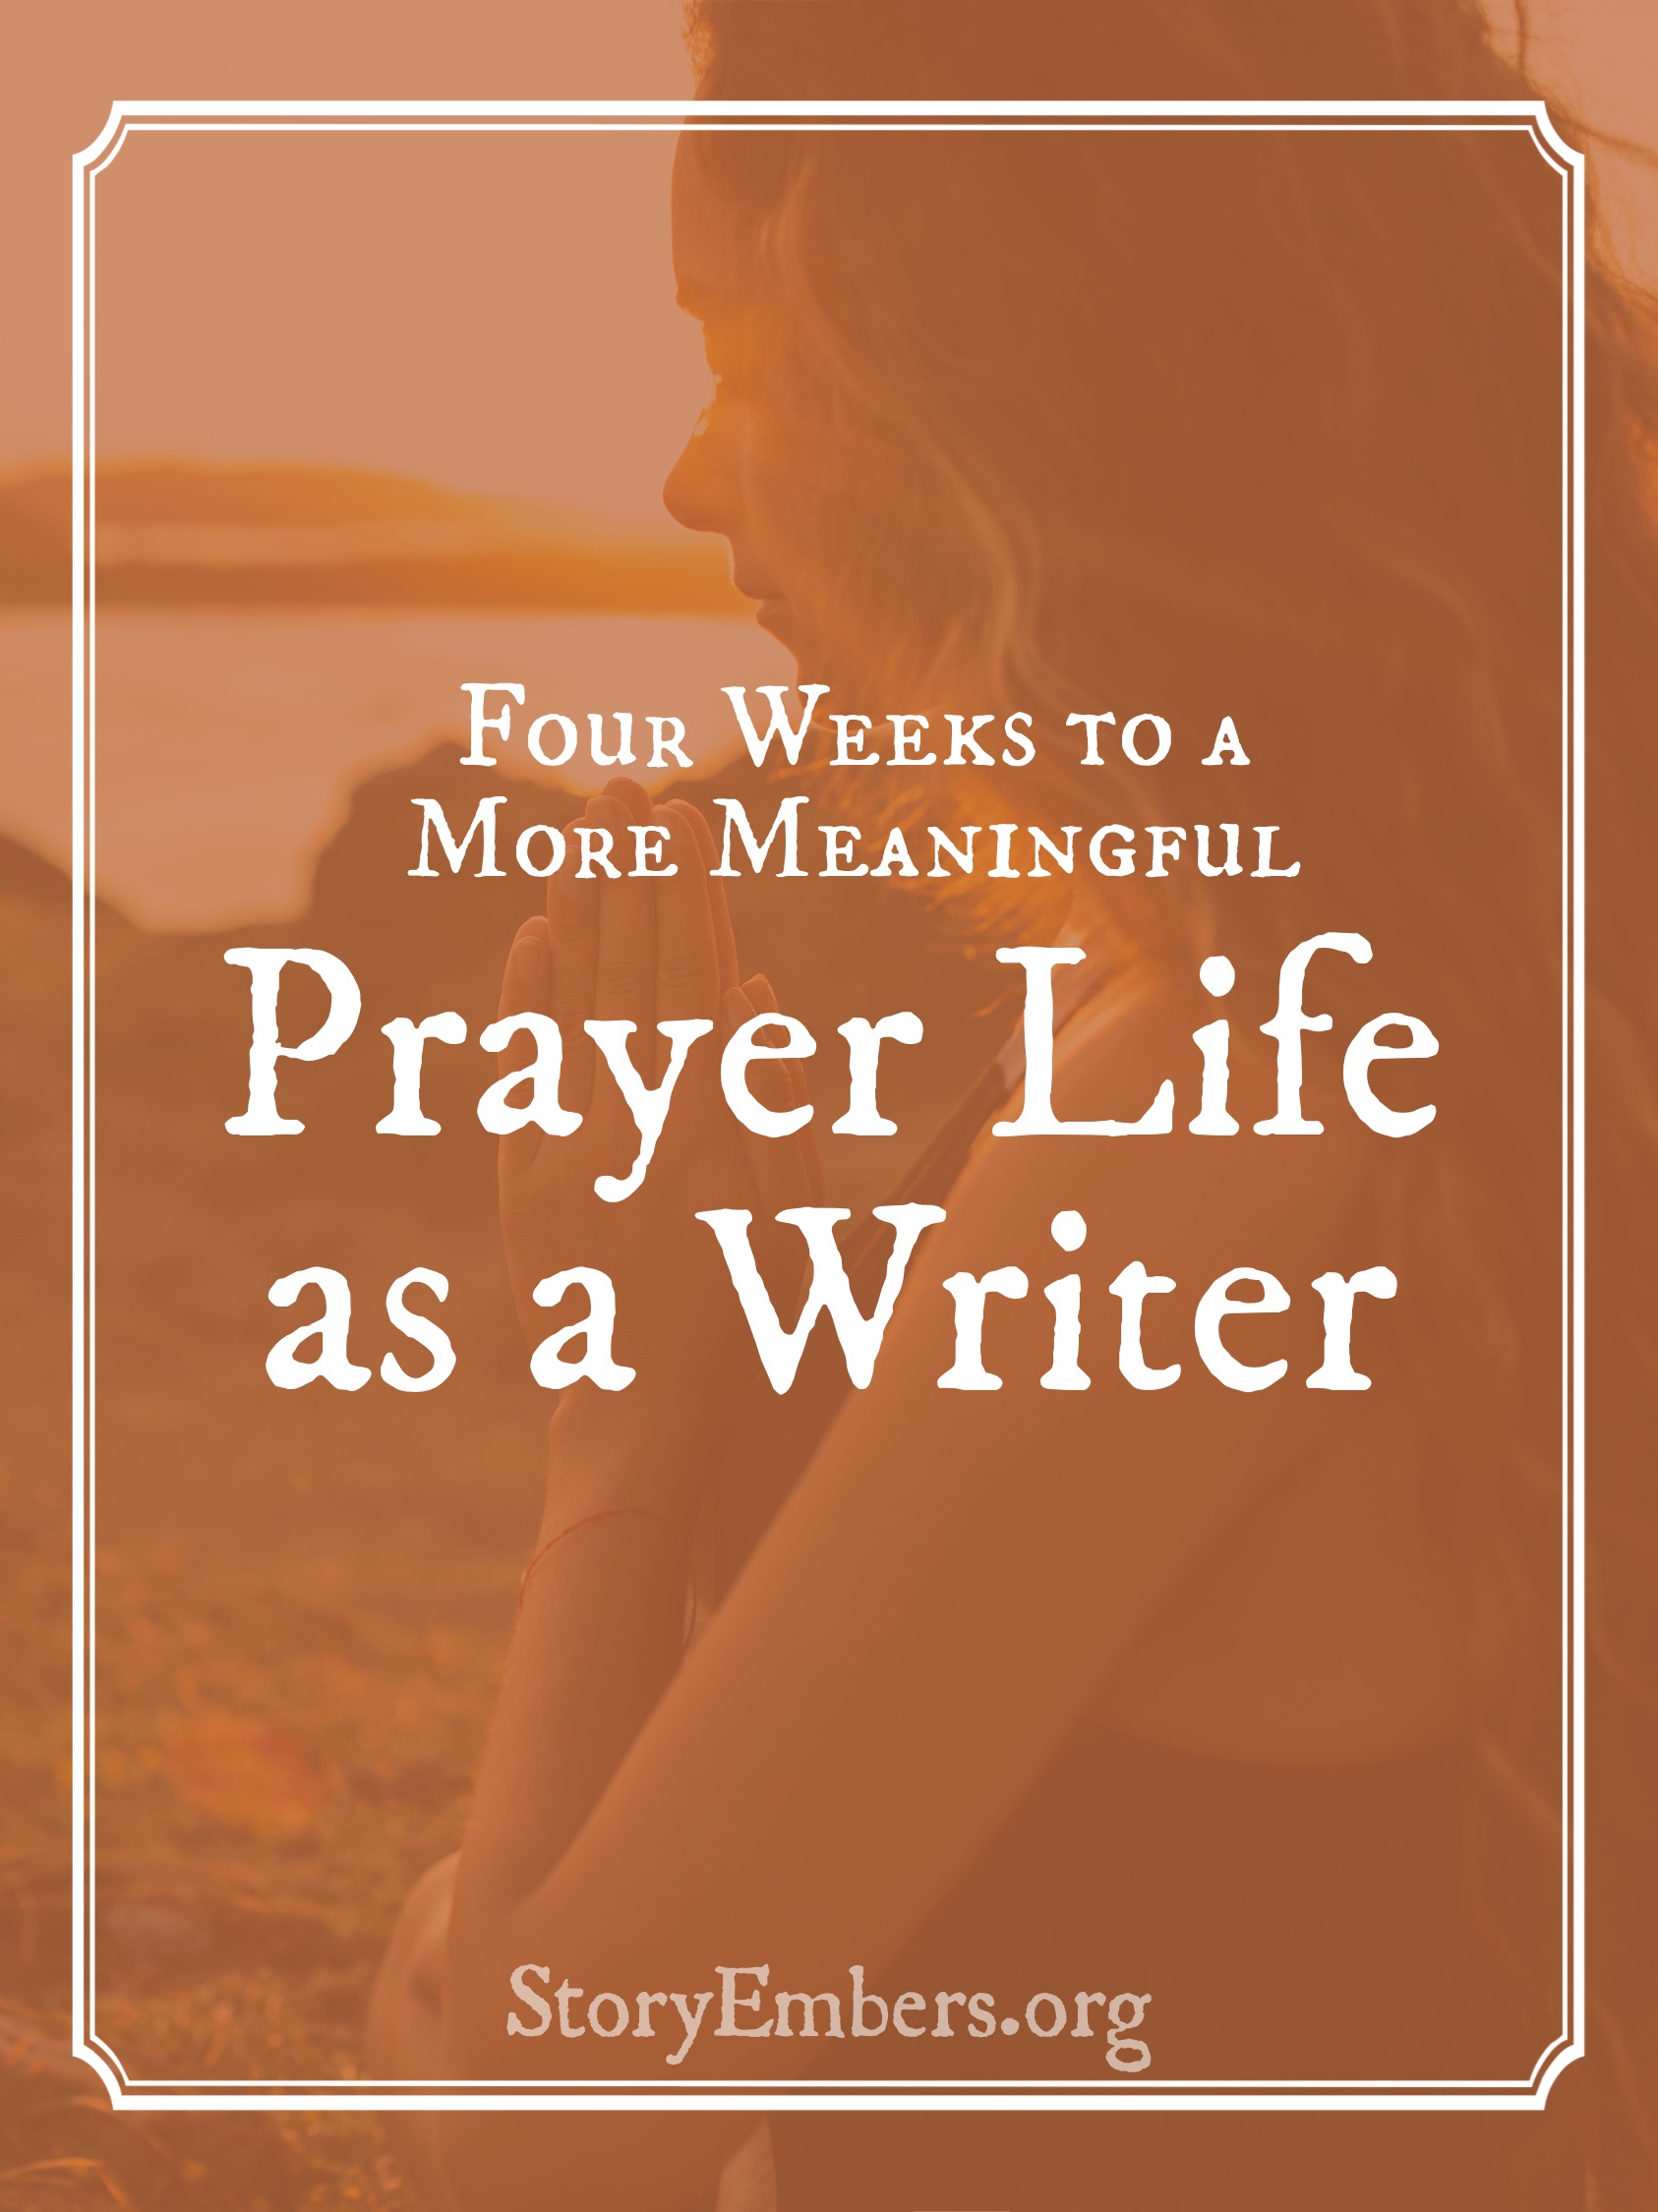 Four Weeks to a More Meaningful Prayer Life as a Writer